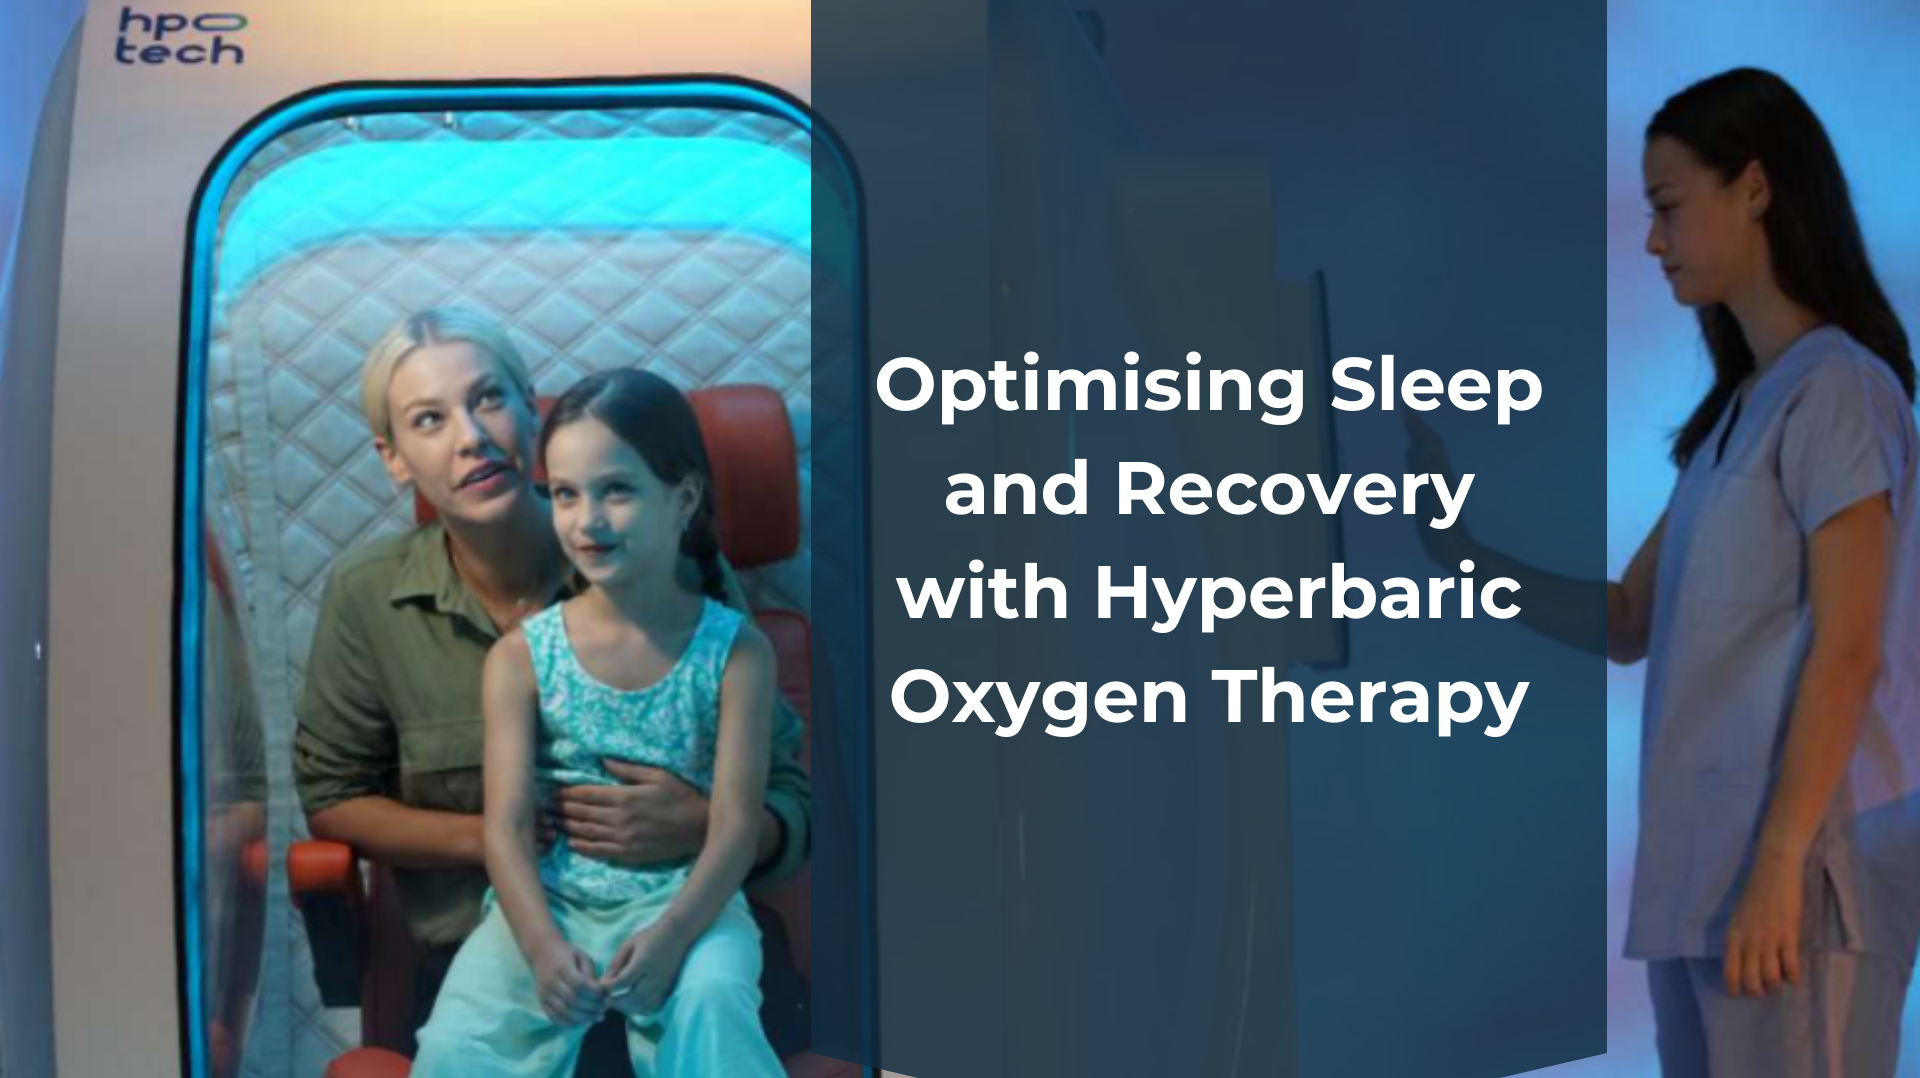 Optimising Sleep and Recovery with Hyperbaric Oxygen Therapy